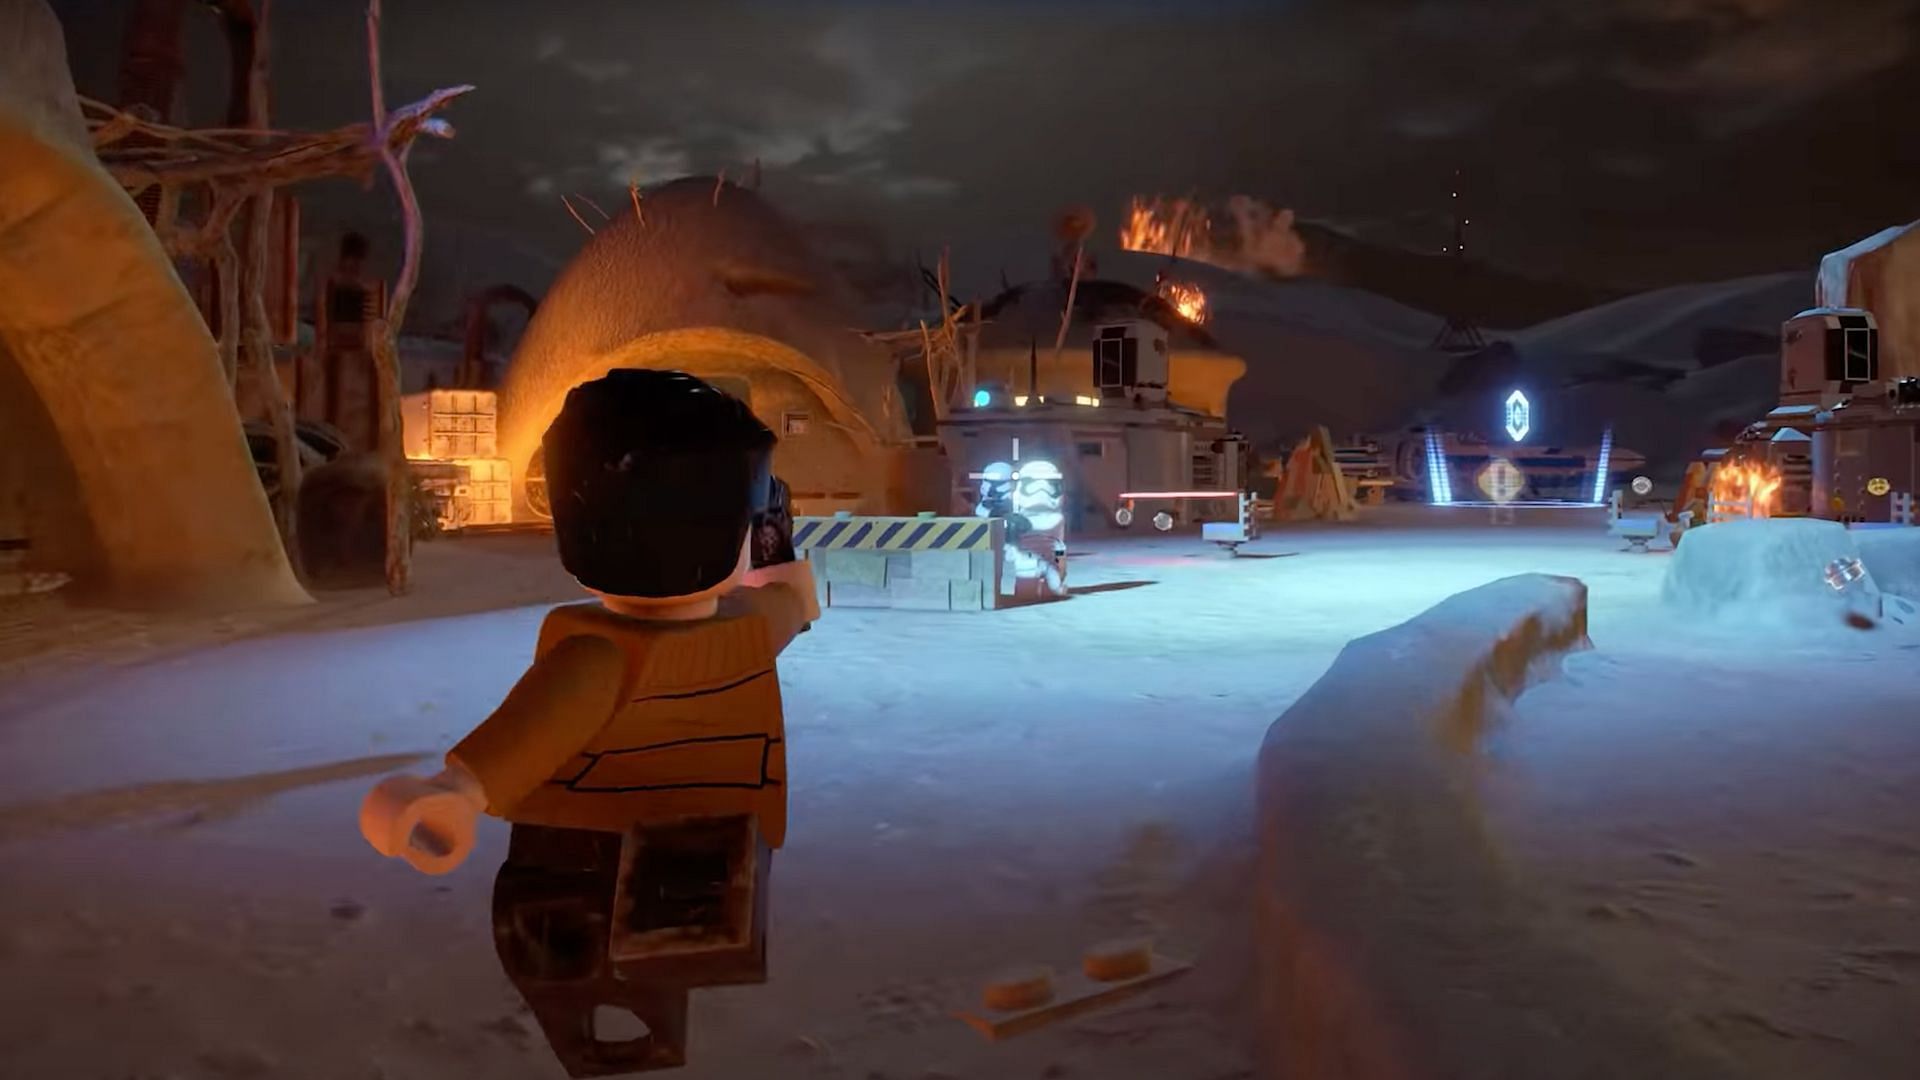 Players can complete many different challenges in Lego Star Wars: The Skywalker Saga (Image via Warner Brothers)